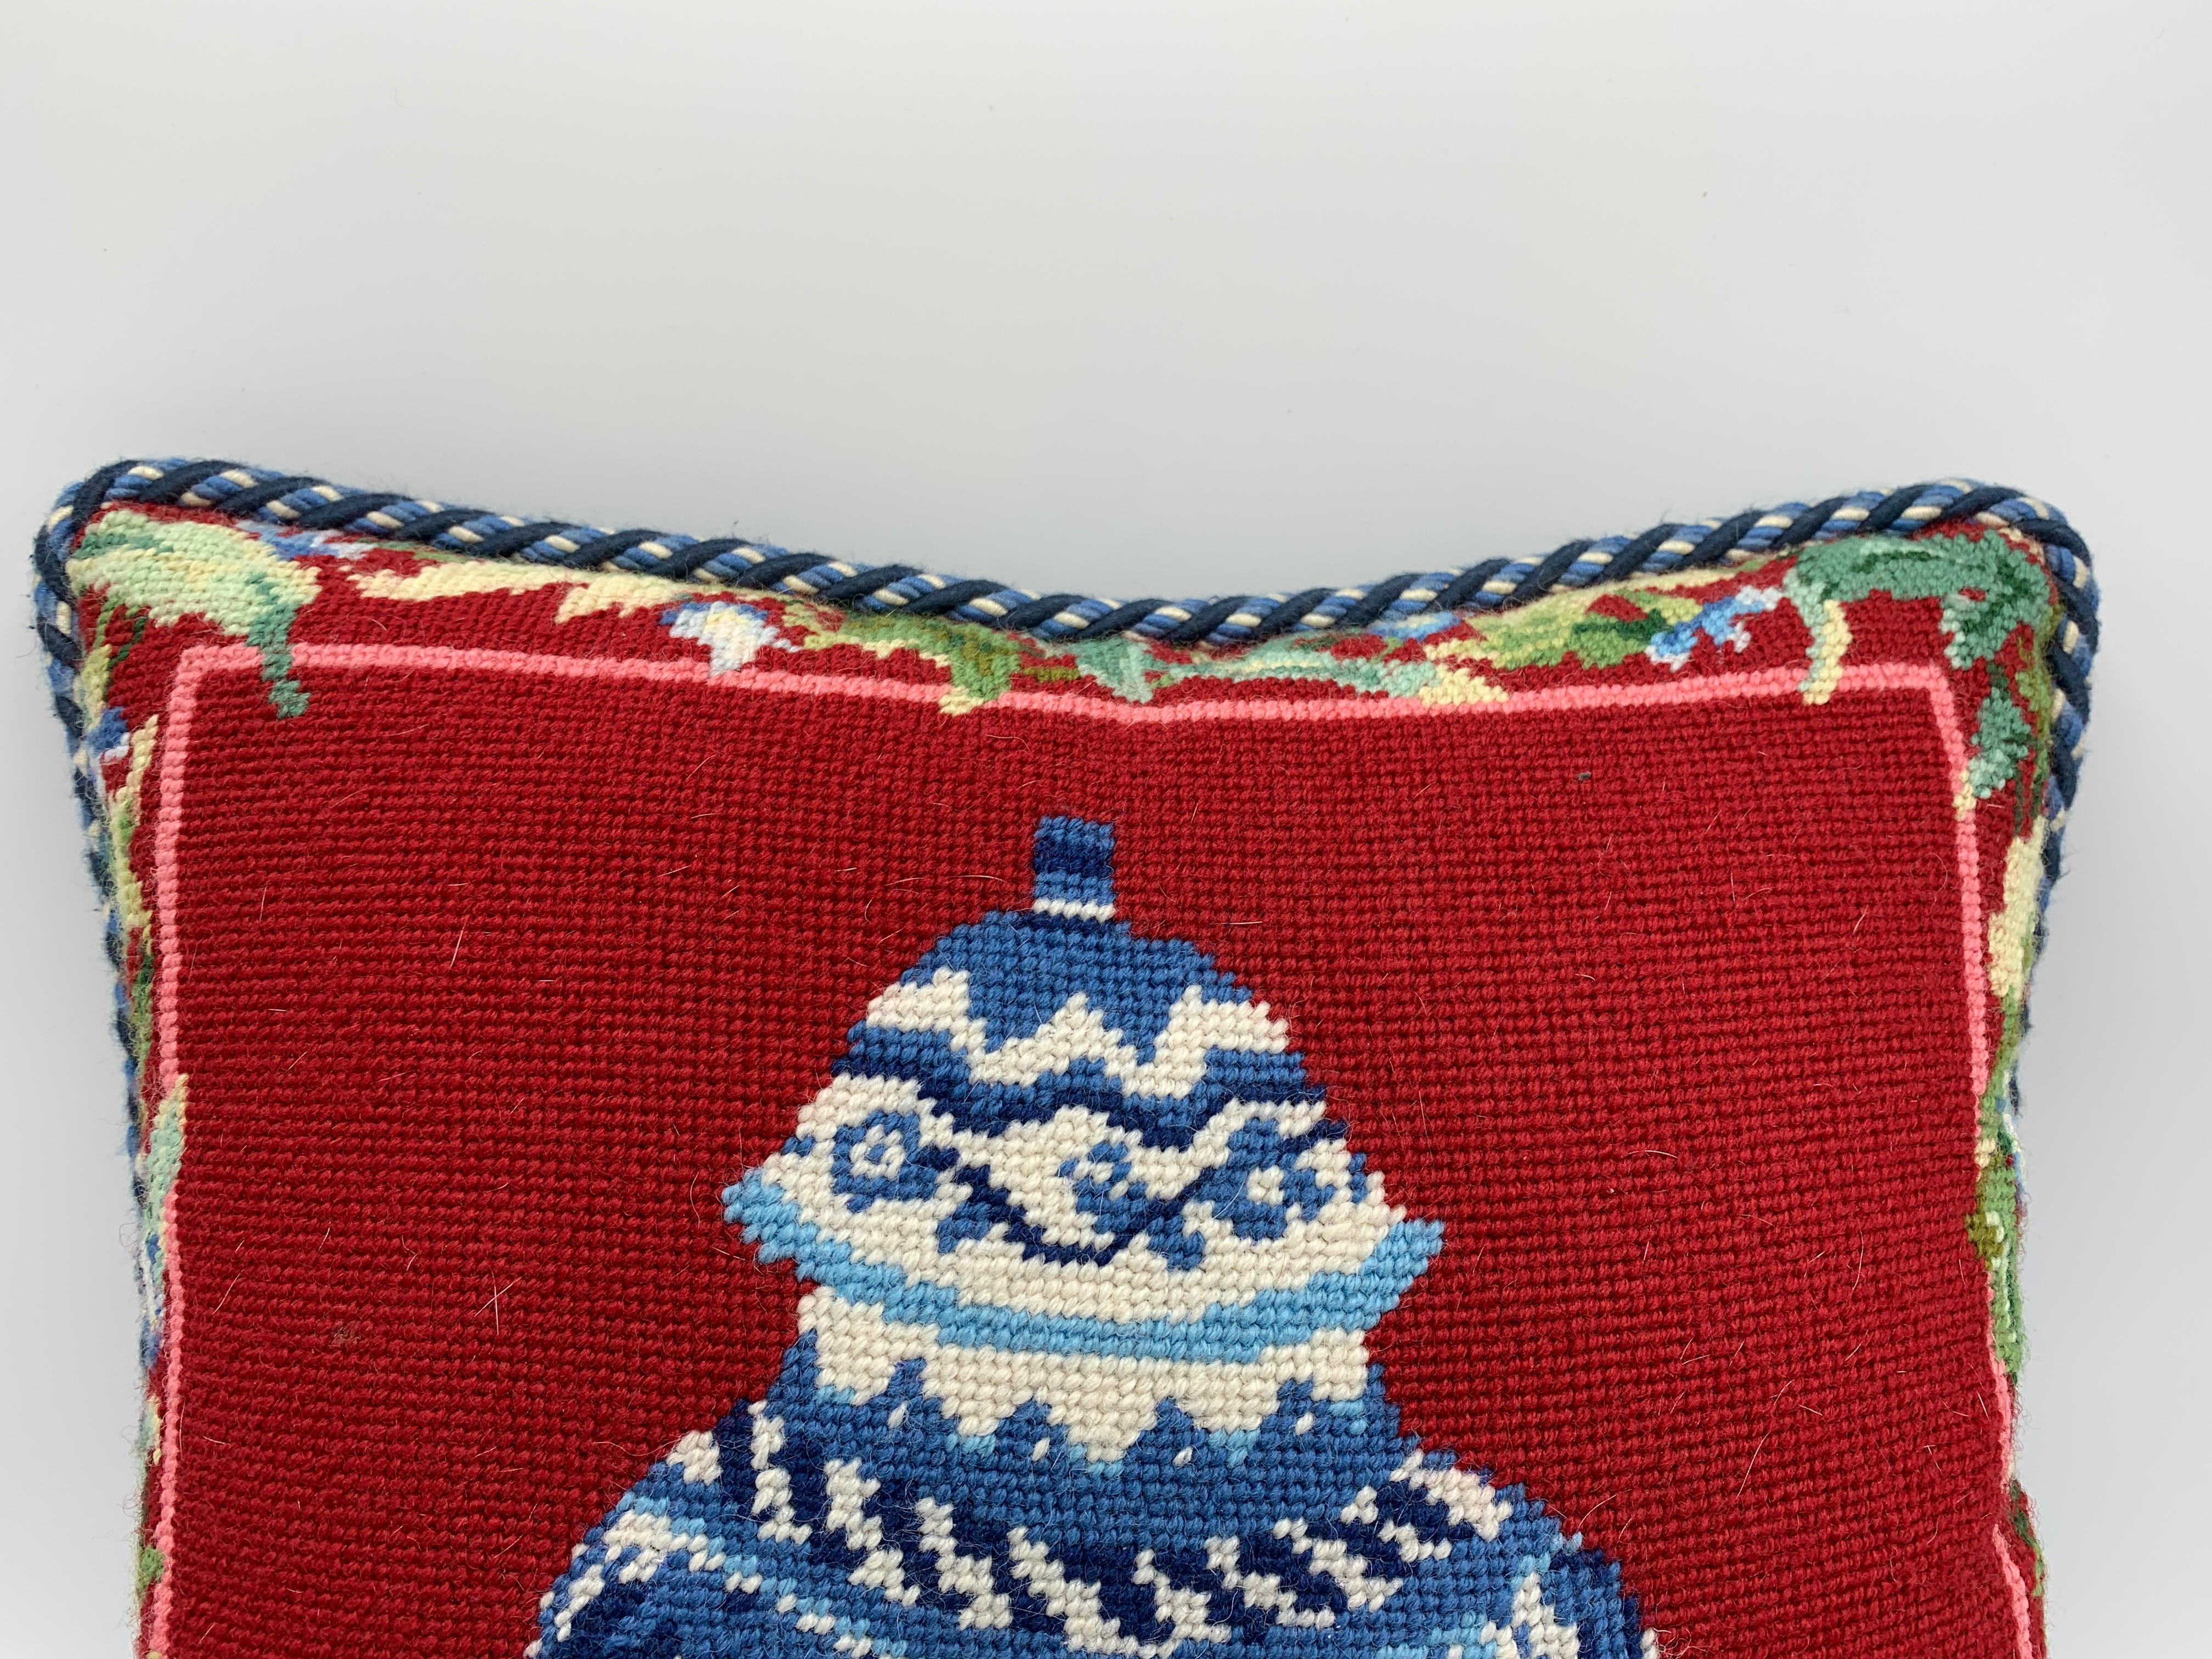 Listed is a stunning, 1970s chinoiserie needlepoint pillow. The piece has a blue and white ginger jar as the focal point, with a striking red background and floral motif along the border. Finished with a thick blue and white cord and velvet backing.